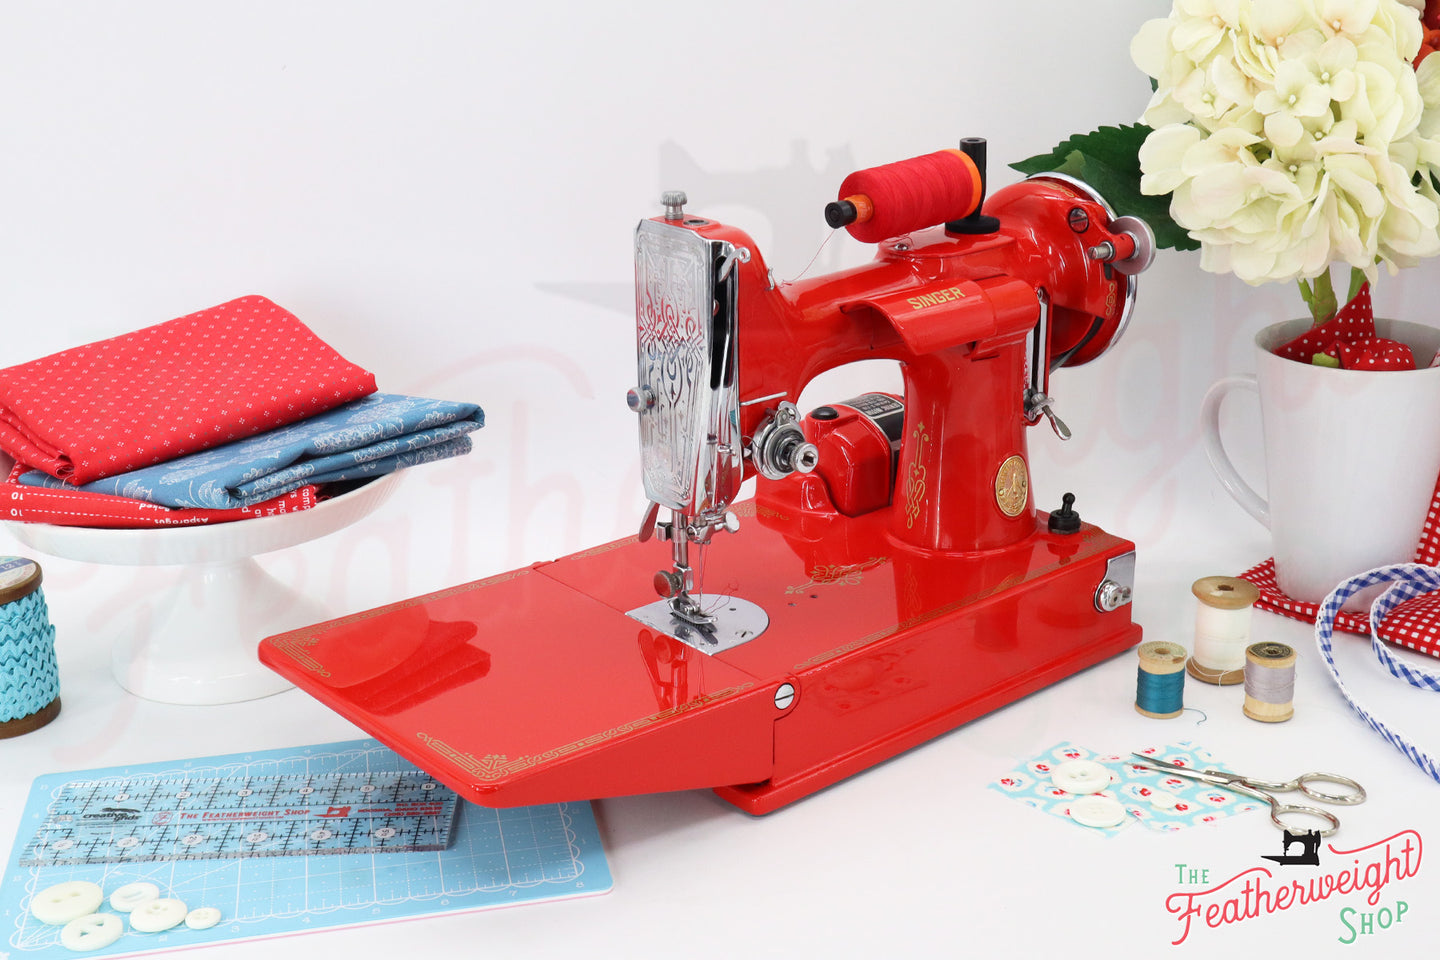 Singer Featherweight 221 Sewing Machine 1933 AD550*** - Fully Restored in Liberty Red